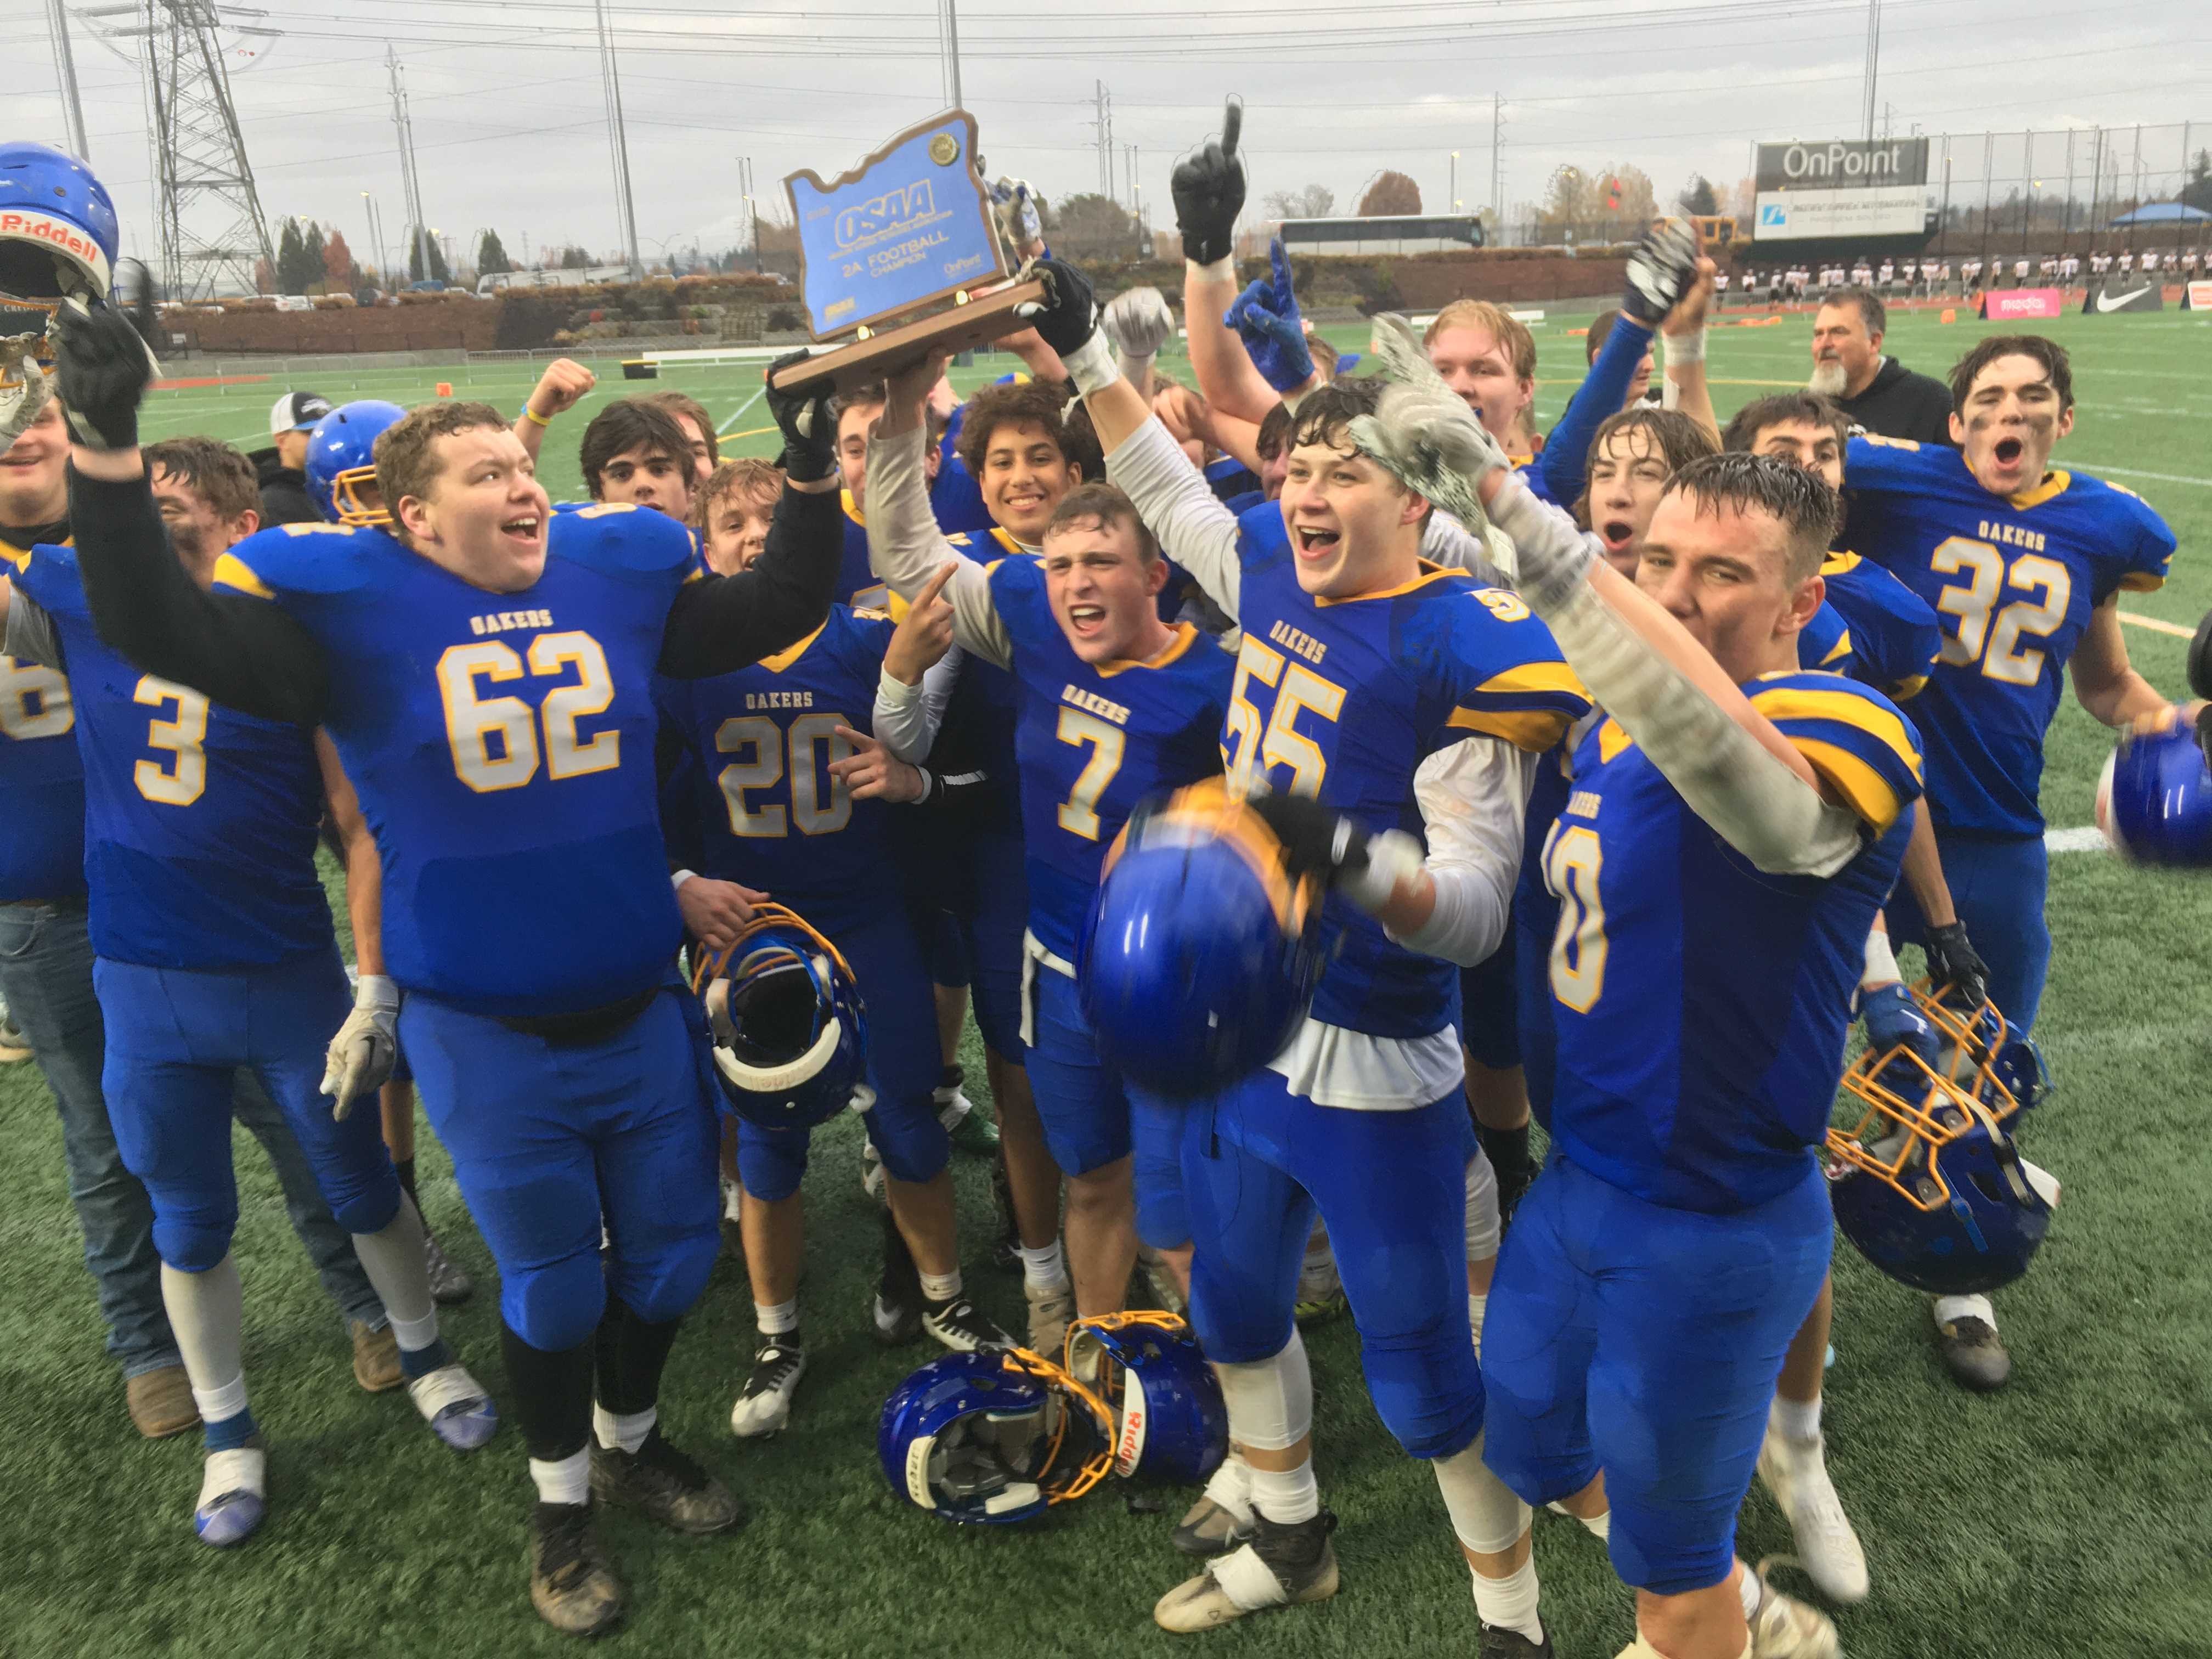 Oakland players hold up their blue trophy after winning their first state championship in 10 years Saturday.